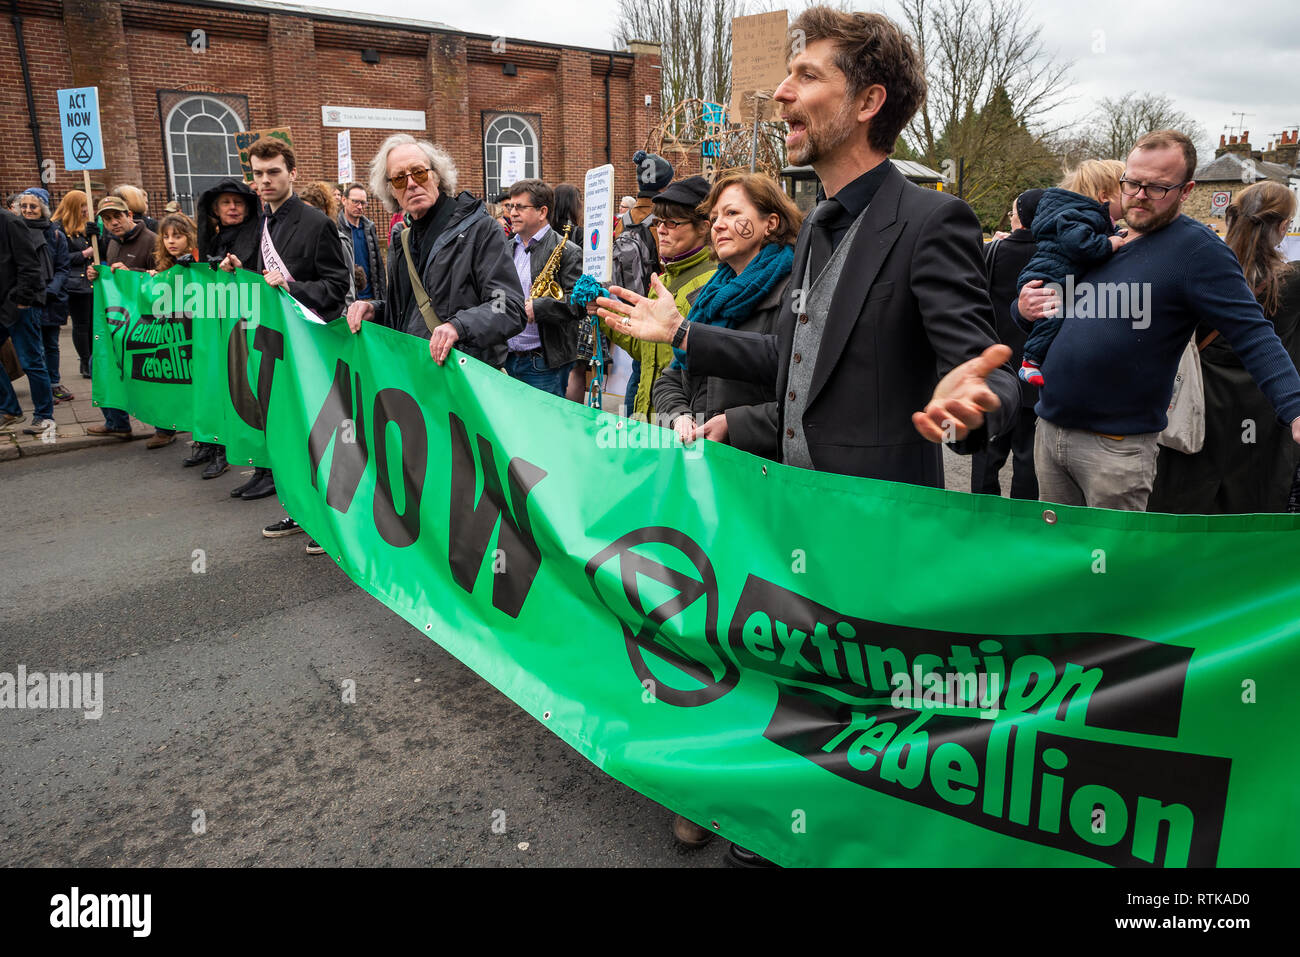 Canterbury, UK. 23rd February 2019. Supporters of the Canterbury Extinction Rebellion Group form up in the City Centre then take part in a symbolic funeral procession representing the death of plants, animals, humans and the planet due to the climate crisis, loss or life. The protest will culminated in a swarming action blocking St. Peters Place. Police were present but didn't interfere, there were no arrests. Credit: Stephen Bell/Alamy Live News Credit: Stephen Bell/Alamy Live News Stock Photo